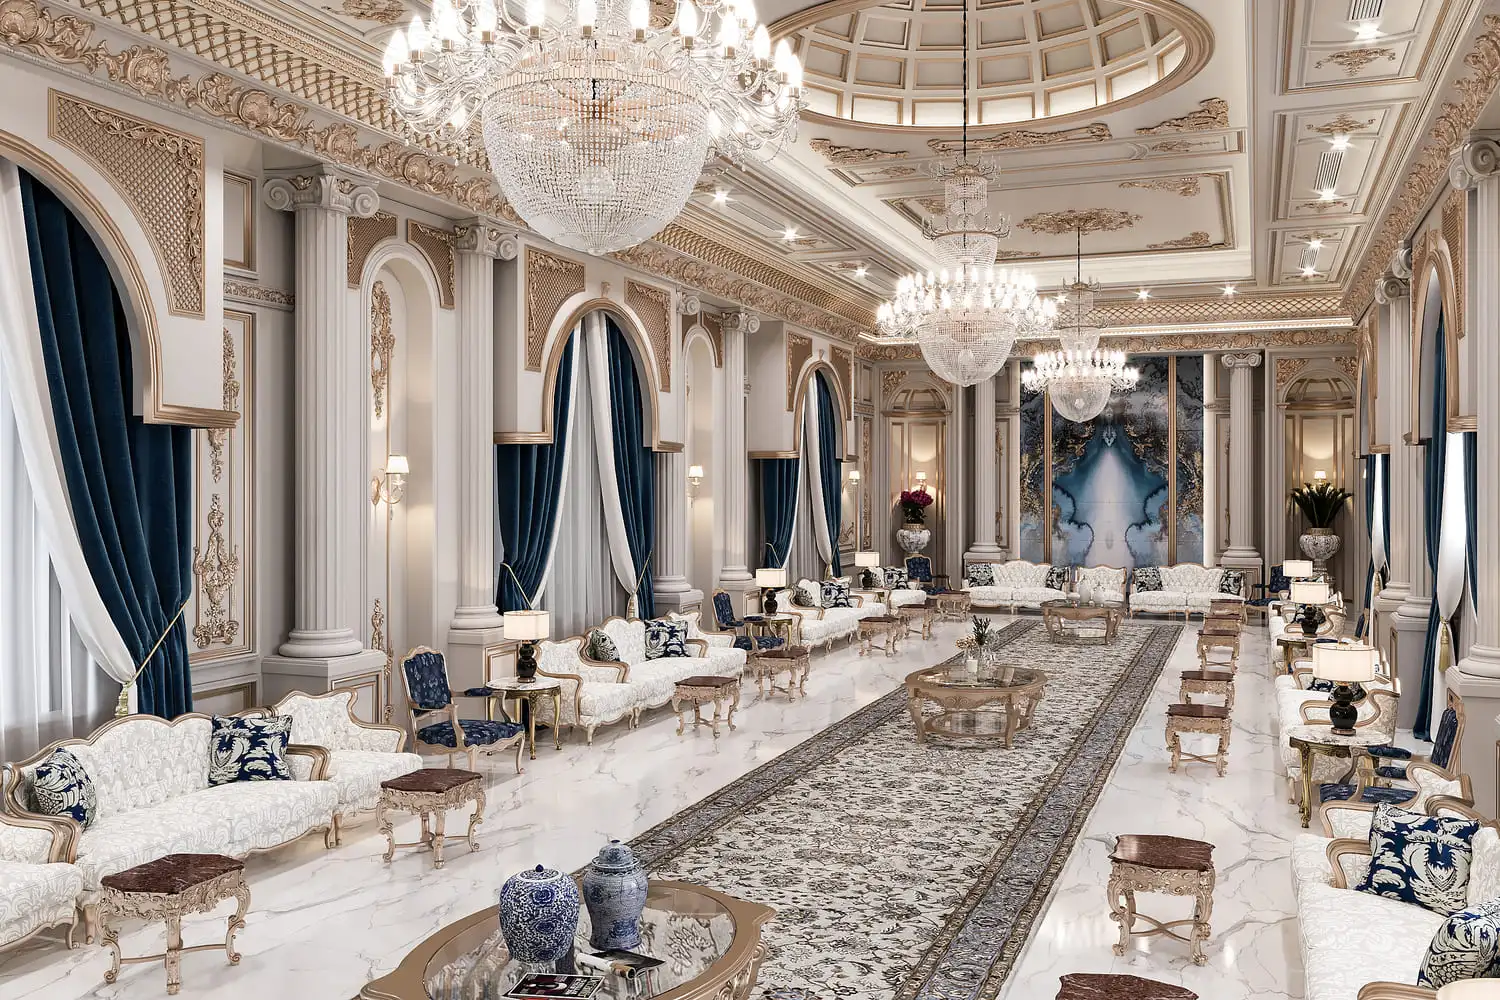 Luxurious Majlis interior design services in Dubai by RCi Red Chillies Interiors LLC, featuring an opulent room with intricate gold detailing, chandeliers, blue velvet curtains, and elegant furnishings.